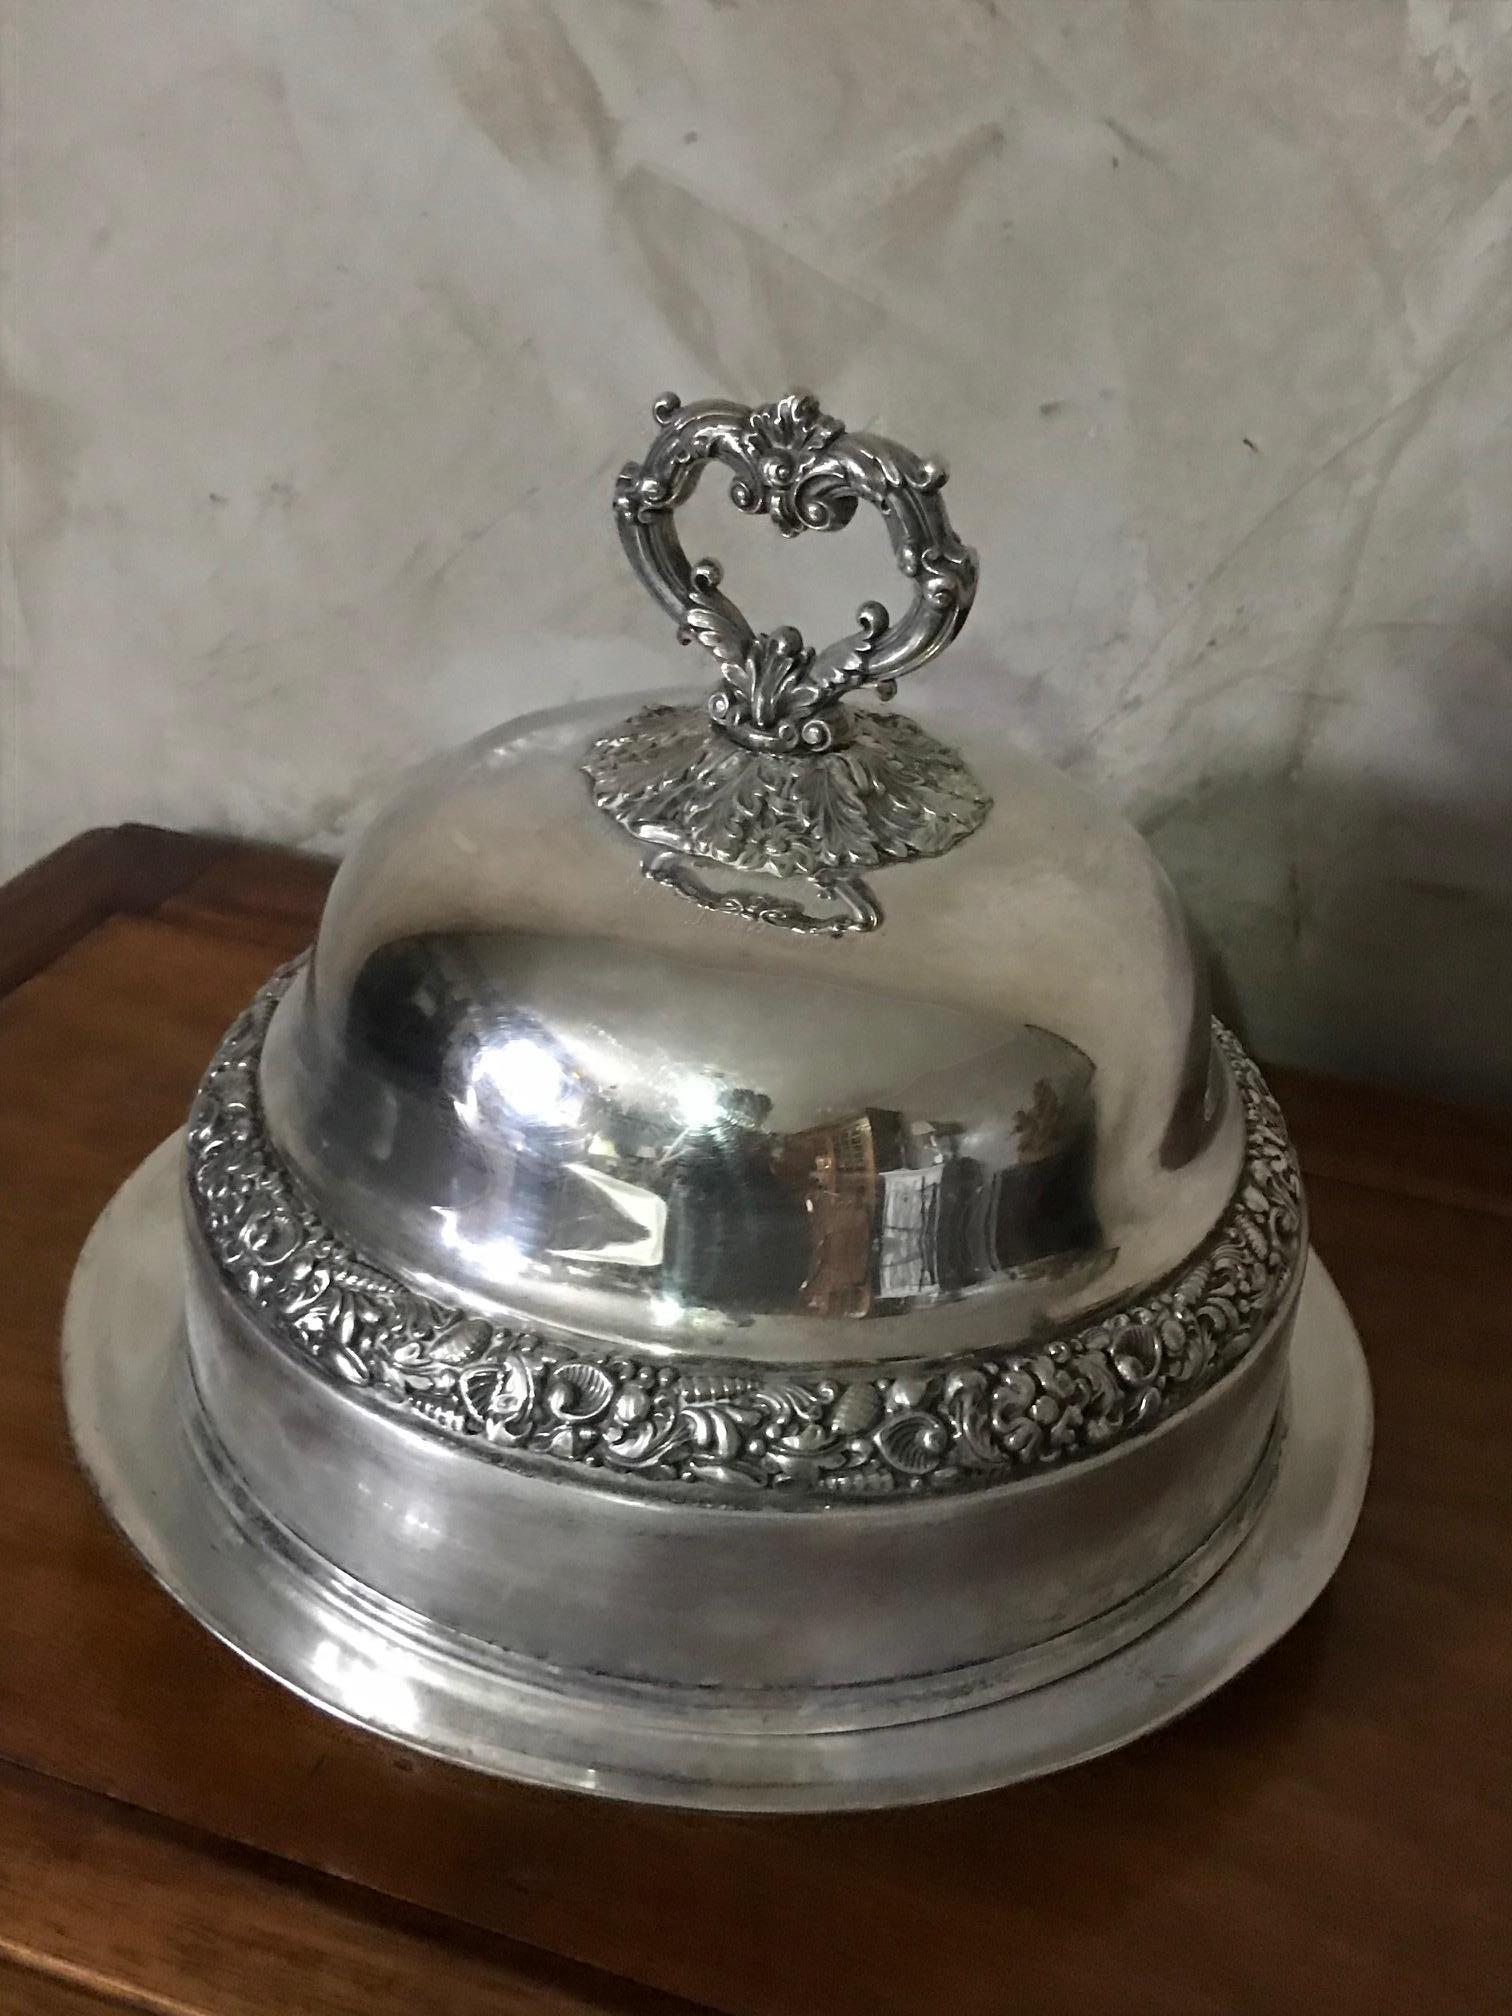 Very nice 20th century silver plated domed dish covered plate from the 1920s.
Beautiful carved silver plated work. Nice handle.
Good quality and condition.